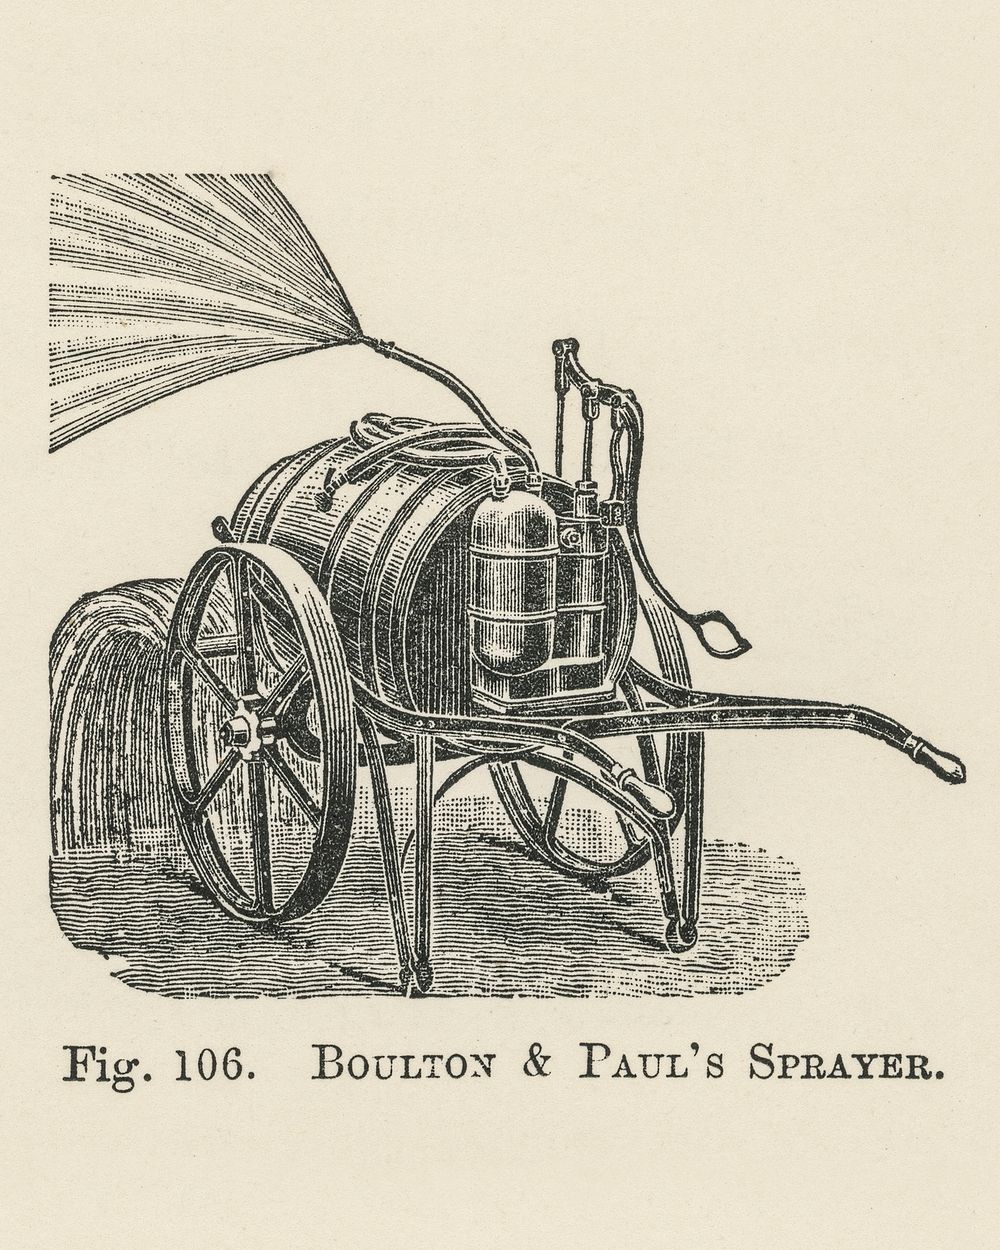 Vintage illustration of boulton, paul's sprayer digitally enhanced from our own vintage edition of The Fruit Grower's Guide…